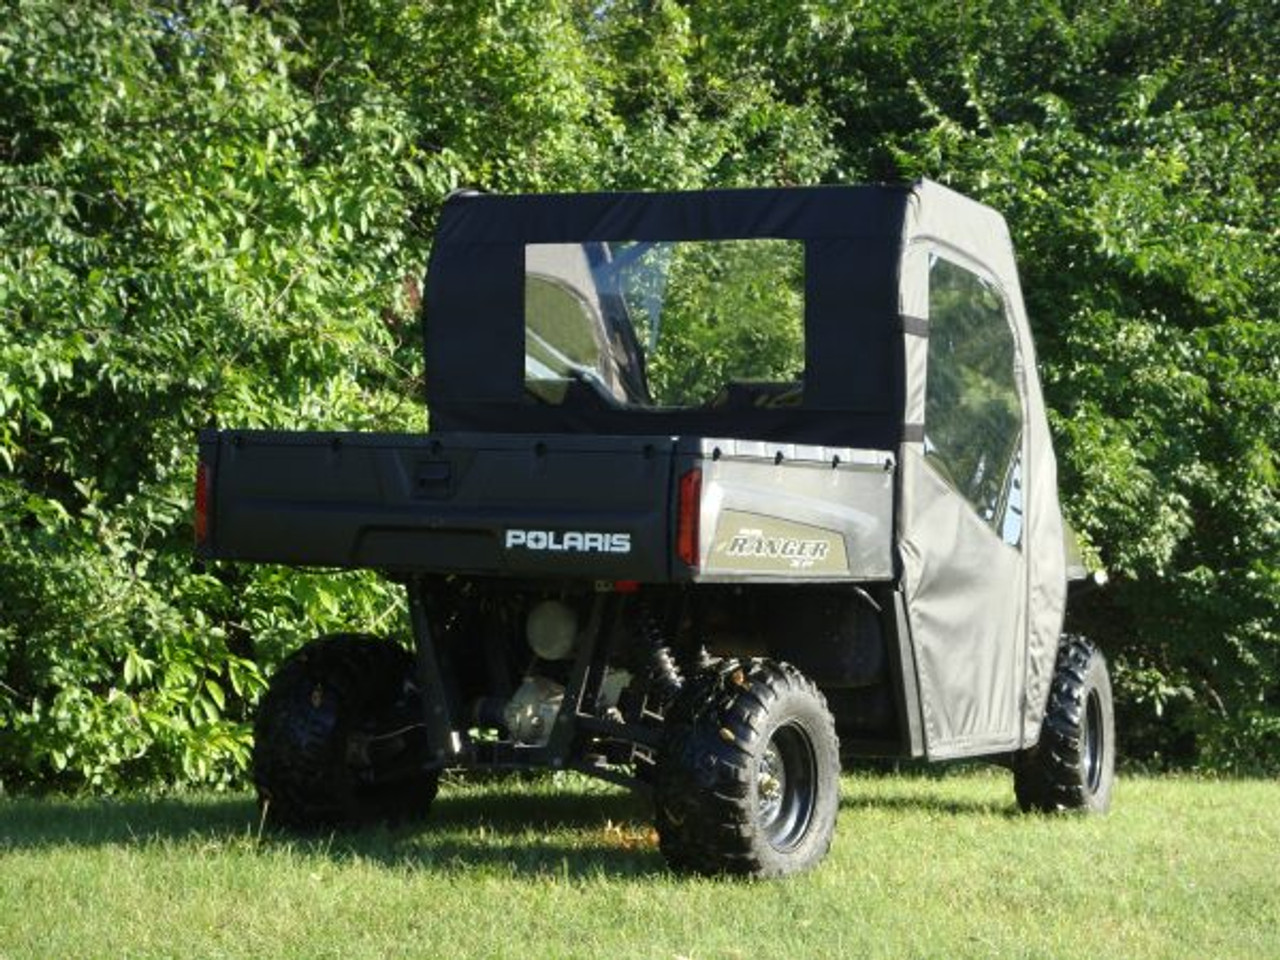 3 Star side x side Polaris Ranger 500 and 700 soft doors and rear window side and rear angle view